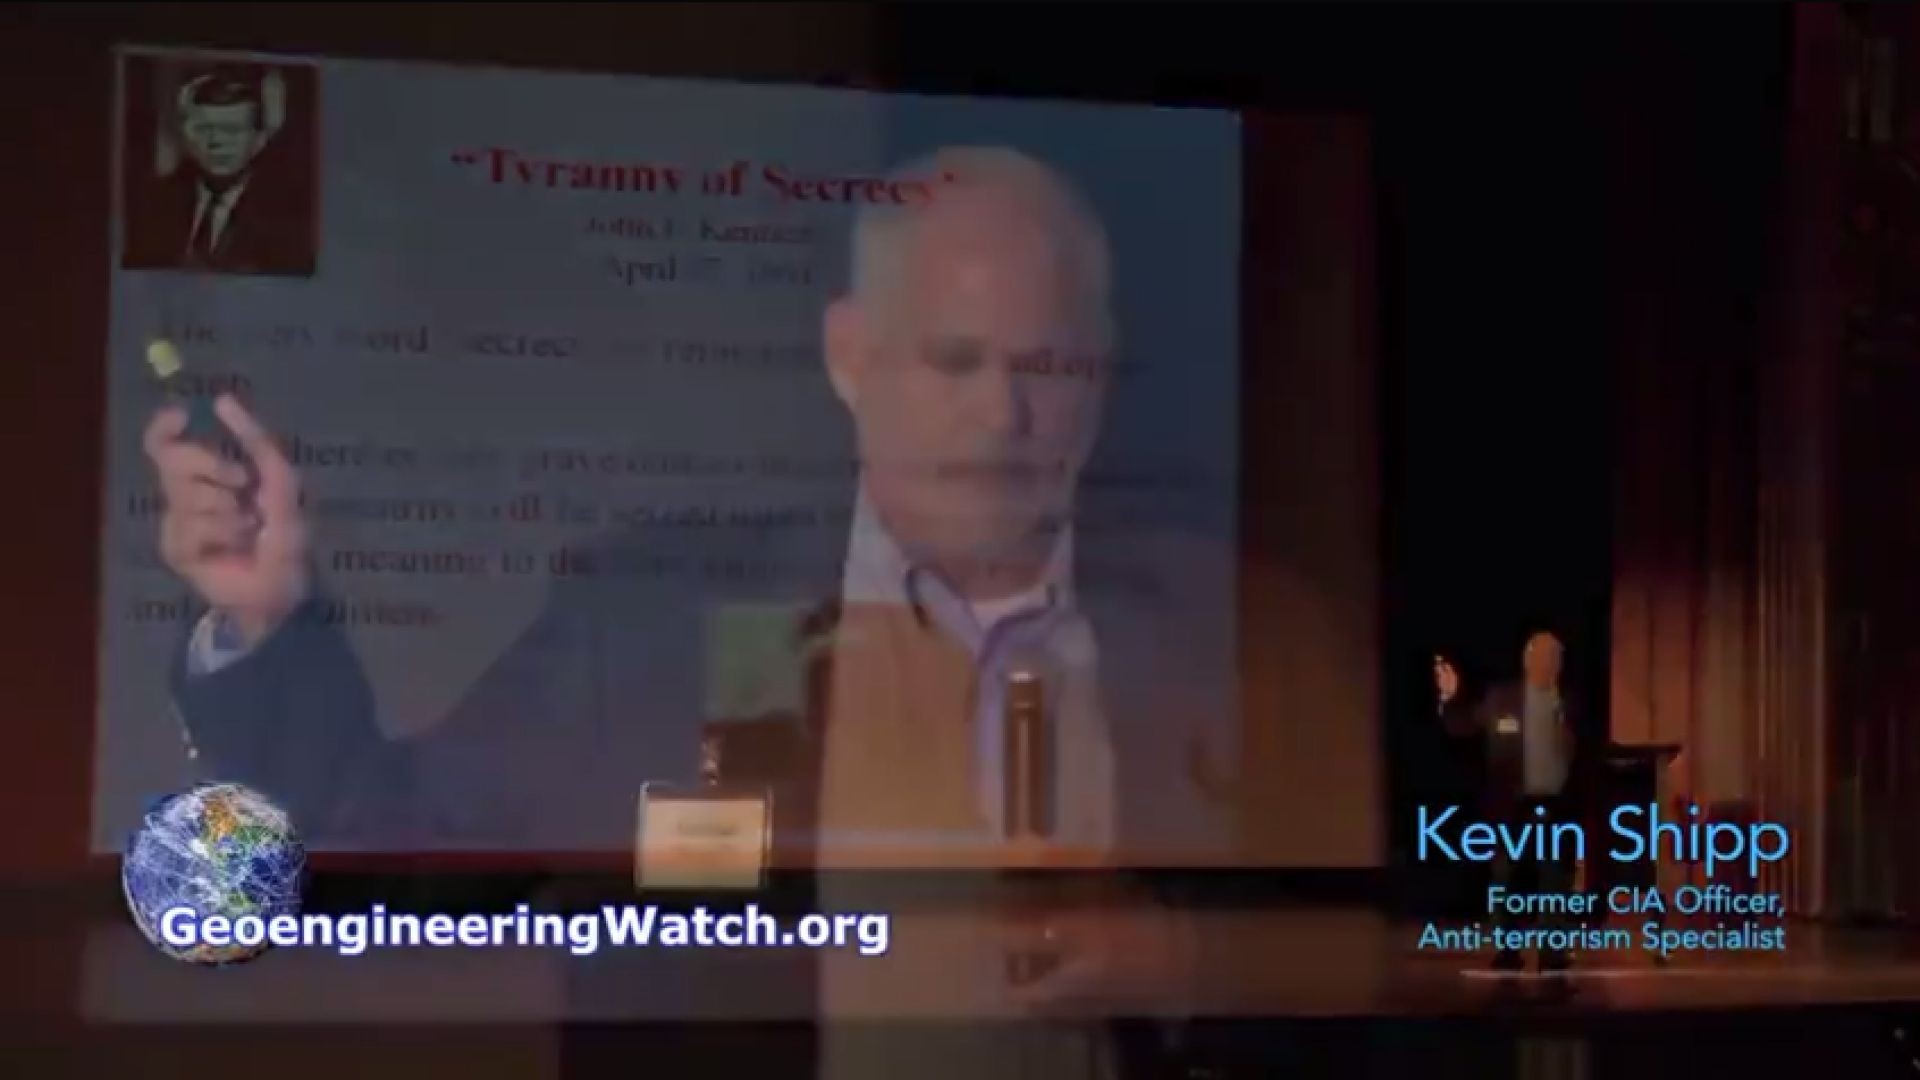 CIA WHISTLEBLOWER SPEAKS OUT ABOUT CLIMATE ENGINEERING